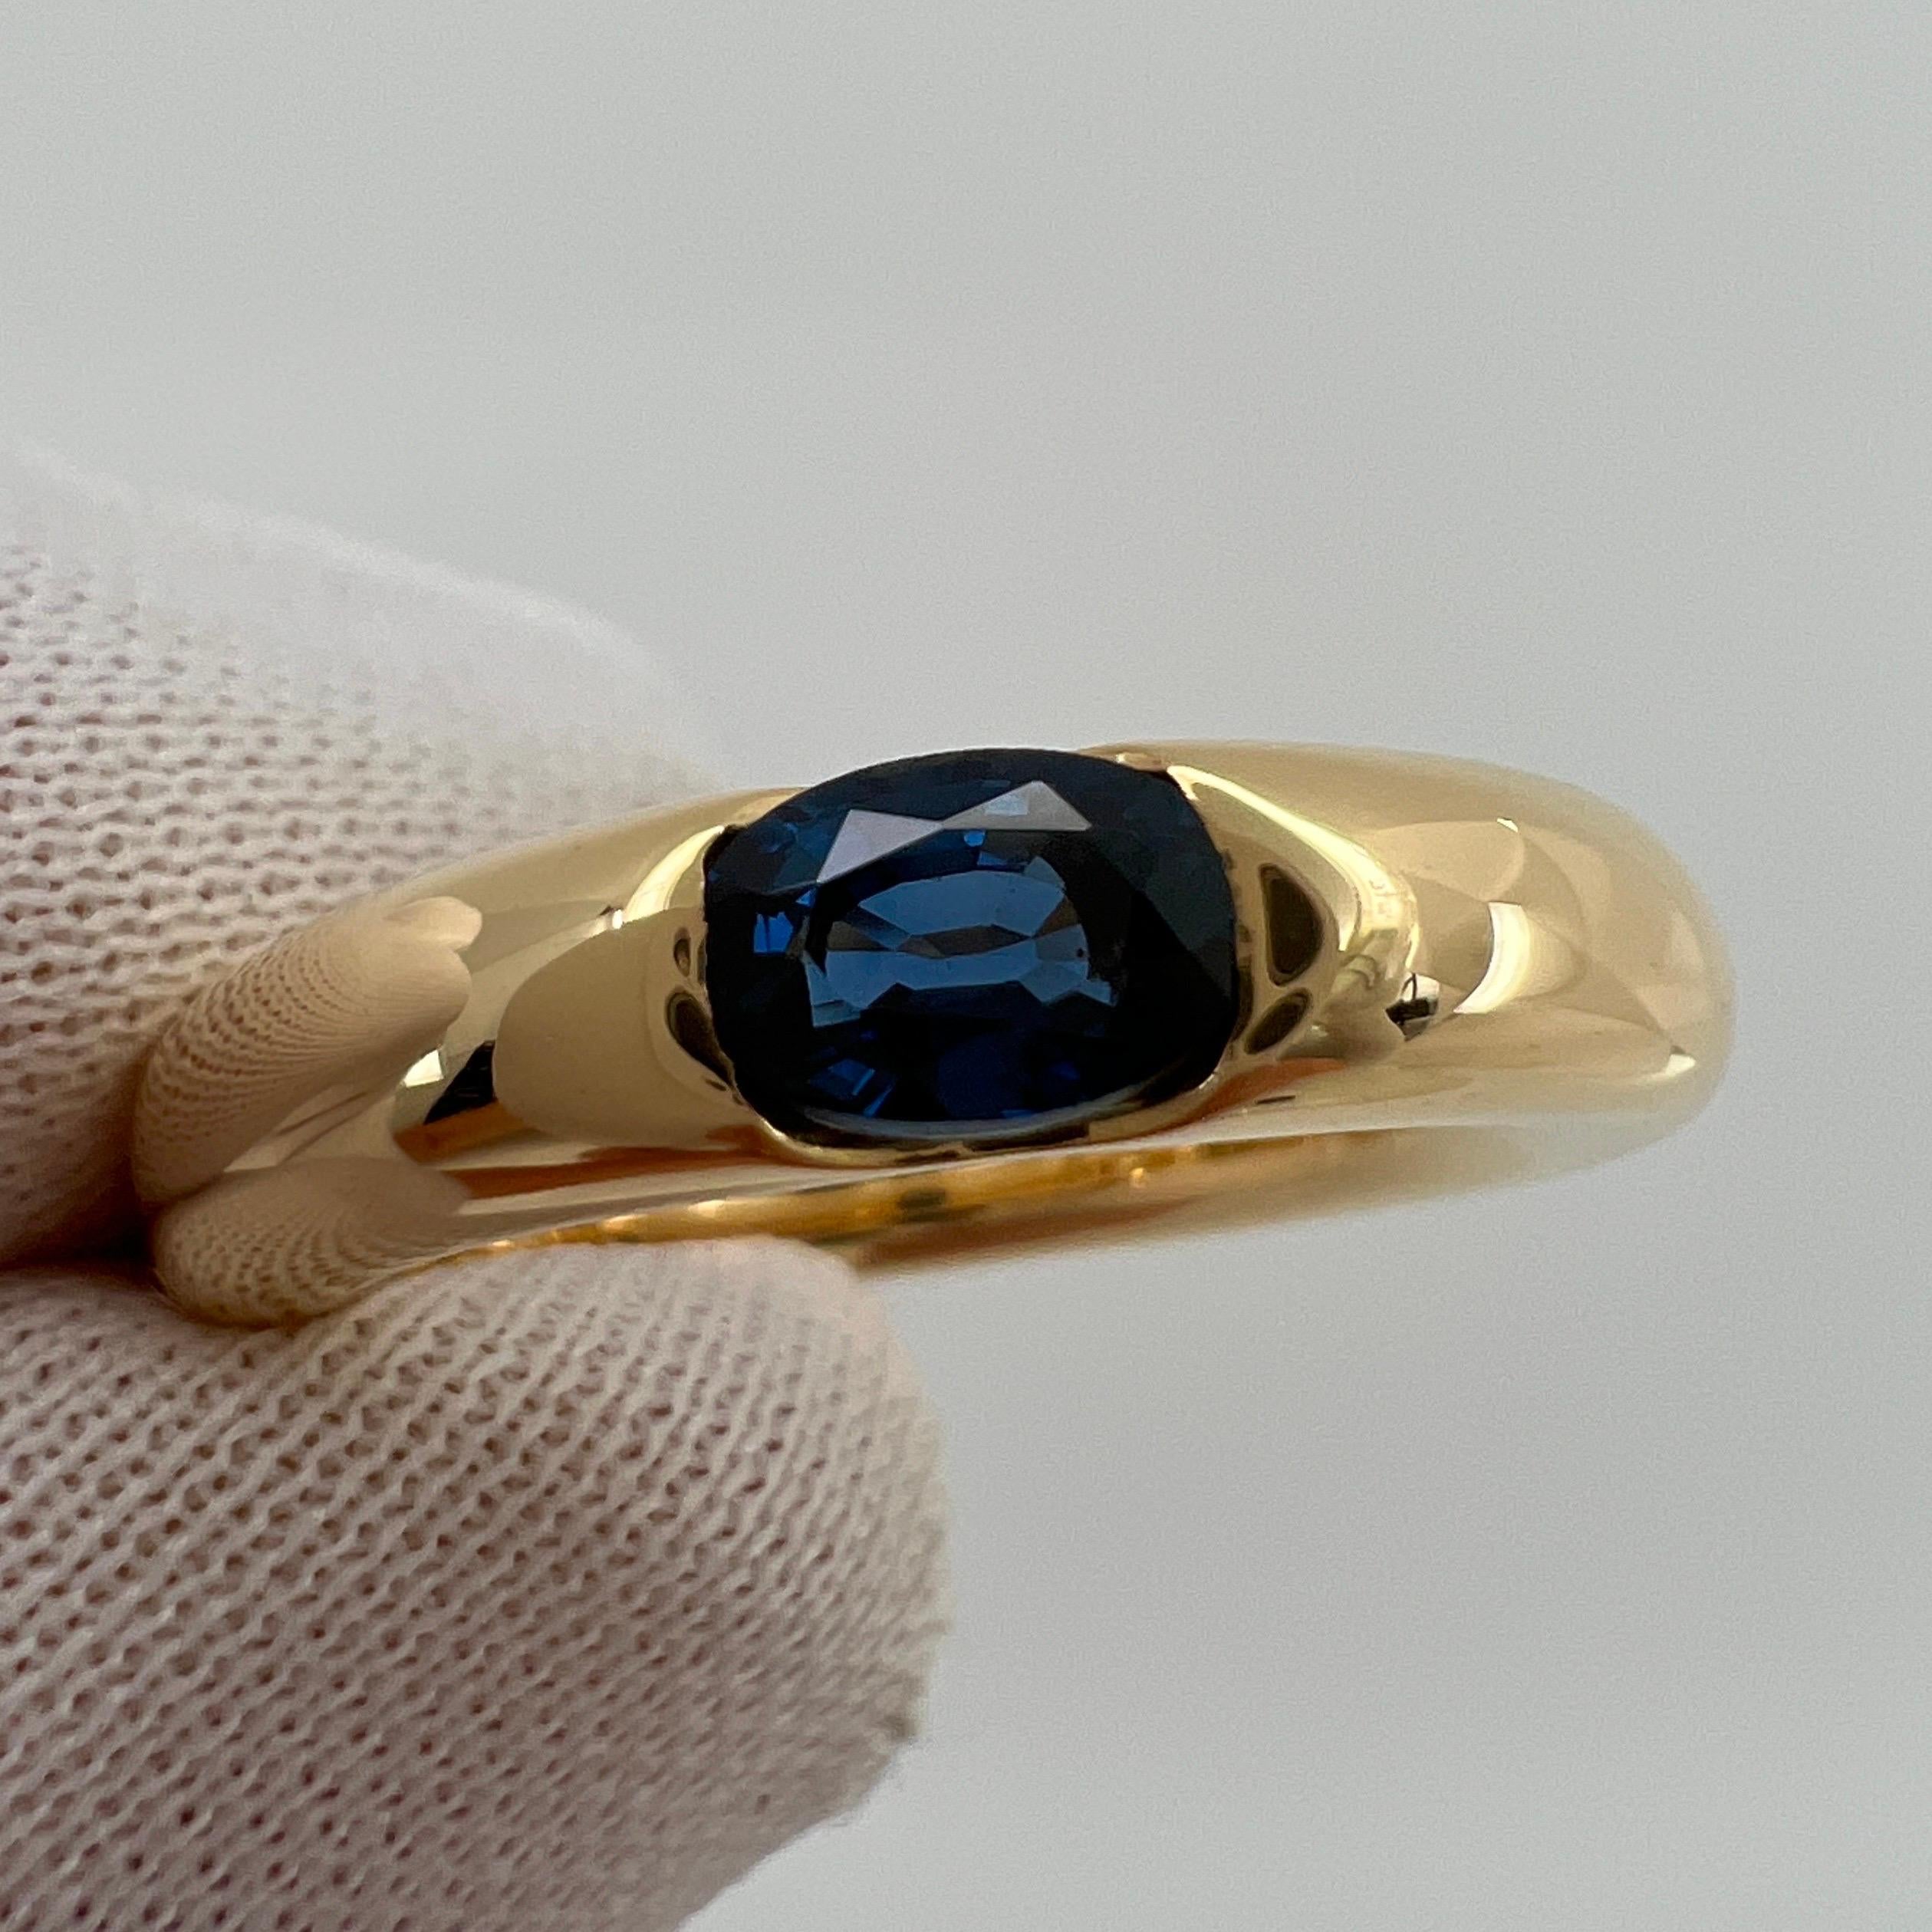 Vintage Cartier Deep Blue Sapphire Oval Ellipse 18k Yellow Gold Solitaire Ring 8